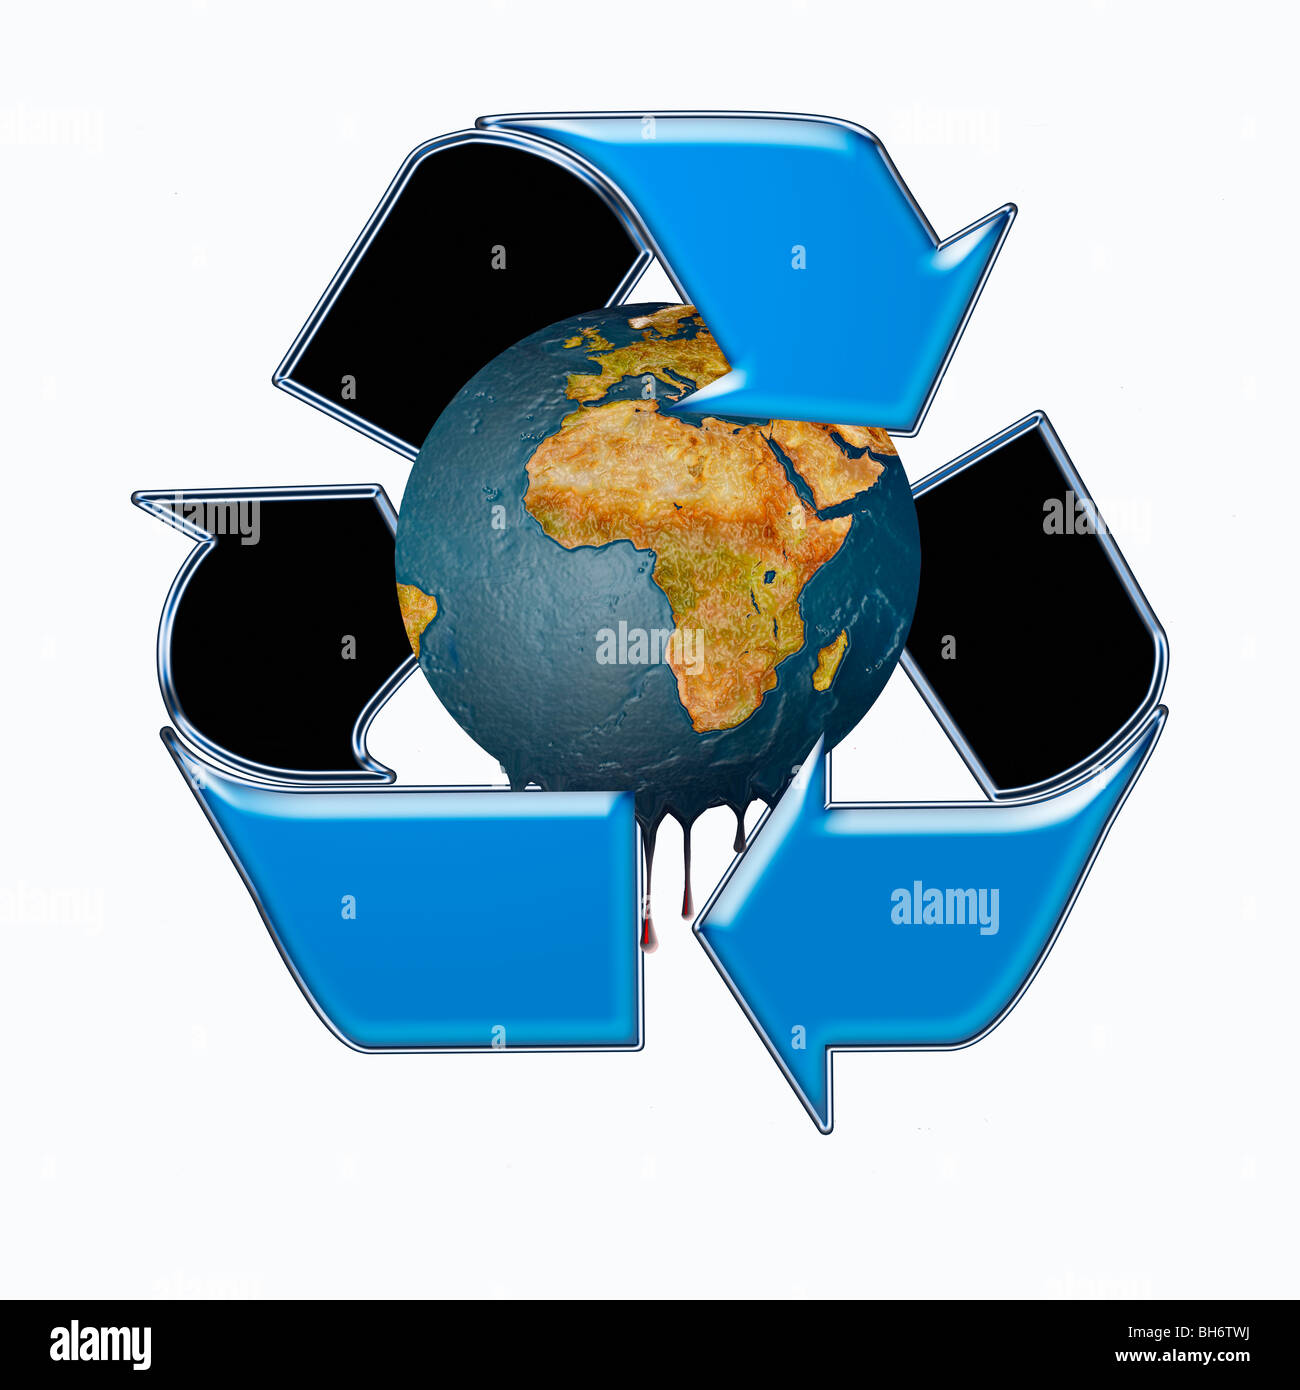 Global Warming, represented by a Melting Planet Earth within a Recycle Symbol Stock Photo